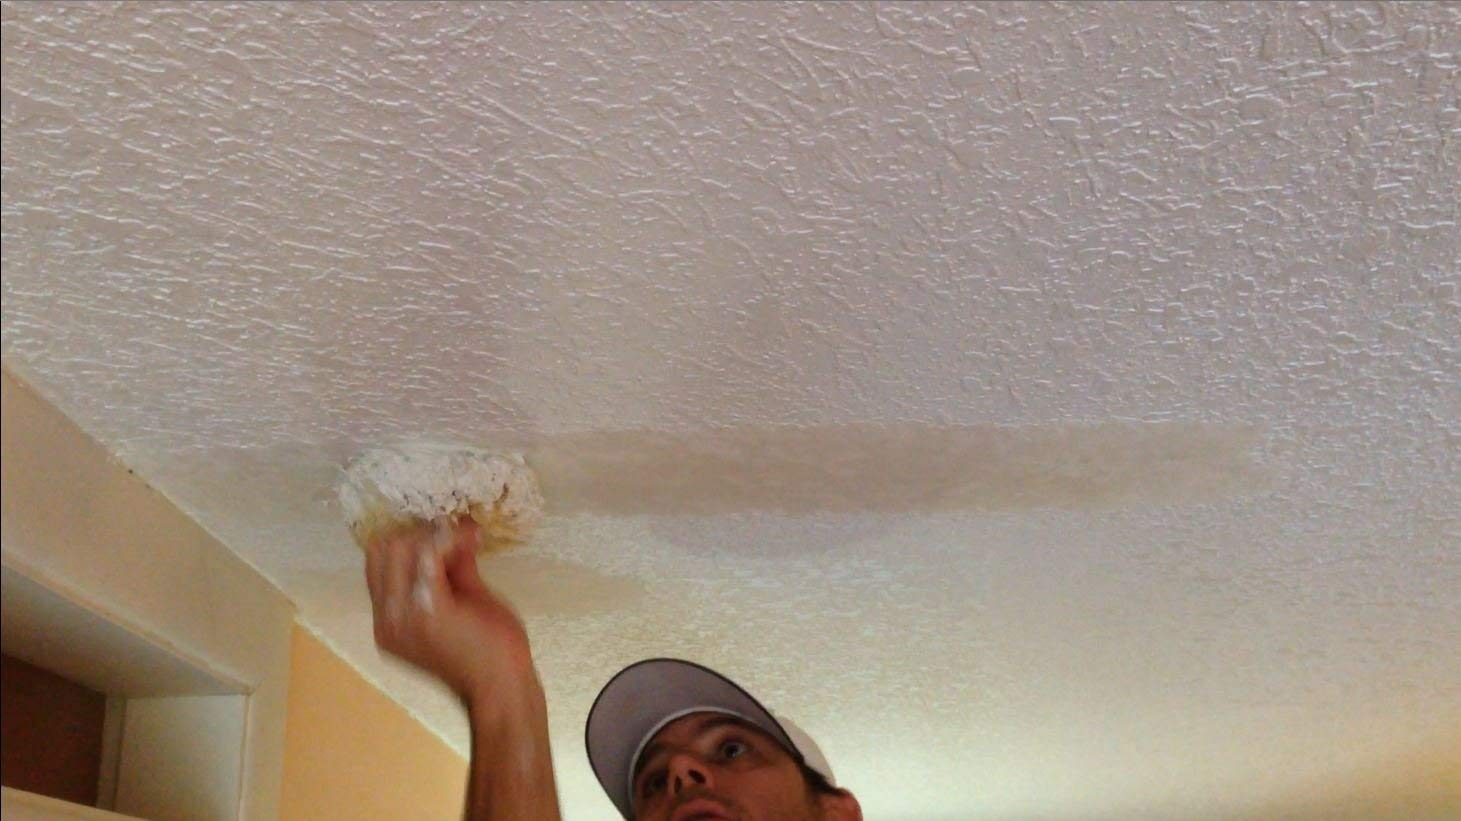 Residential Popcorn Removal-South Florida Popcorn Ceiling Removal-We offer professional popcorn removal services, residential & commercial popcorn ceiling removal, Knockdown Texture, Orange Peel Ceilings, Smooth Ceiling Finish, and Drywall Repair